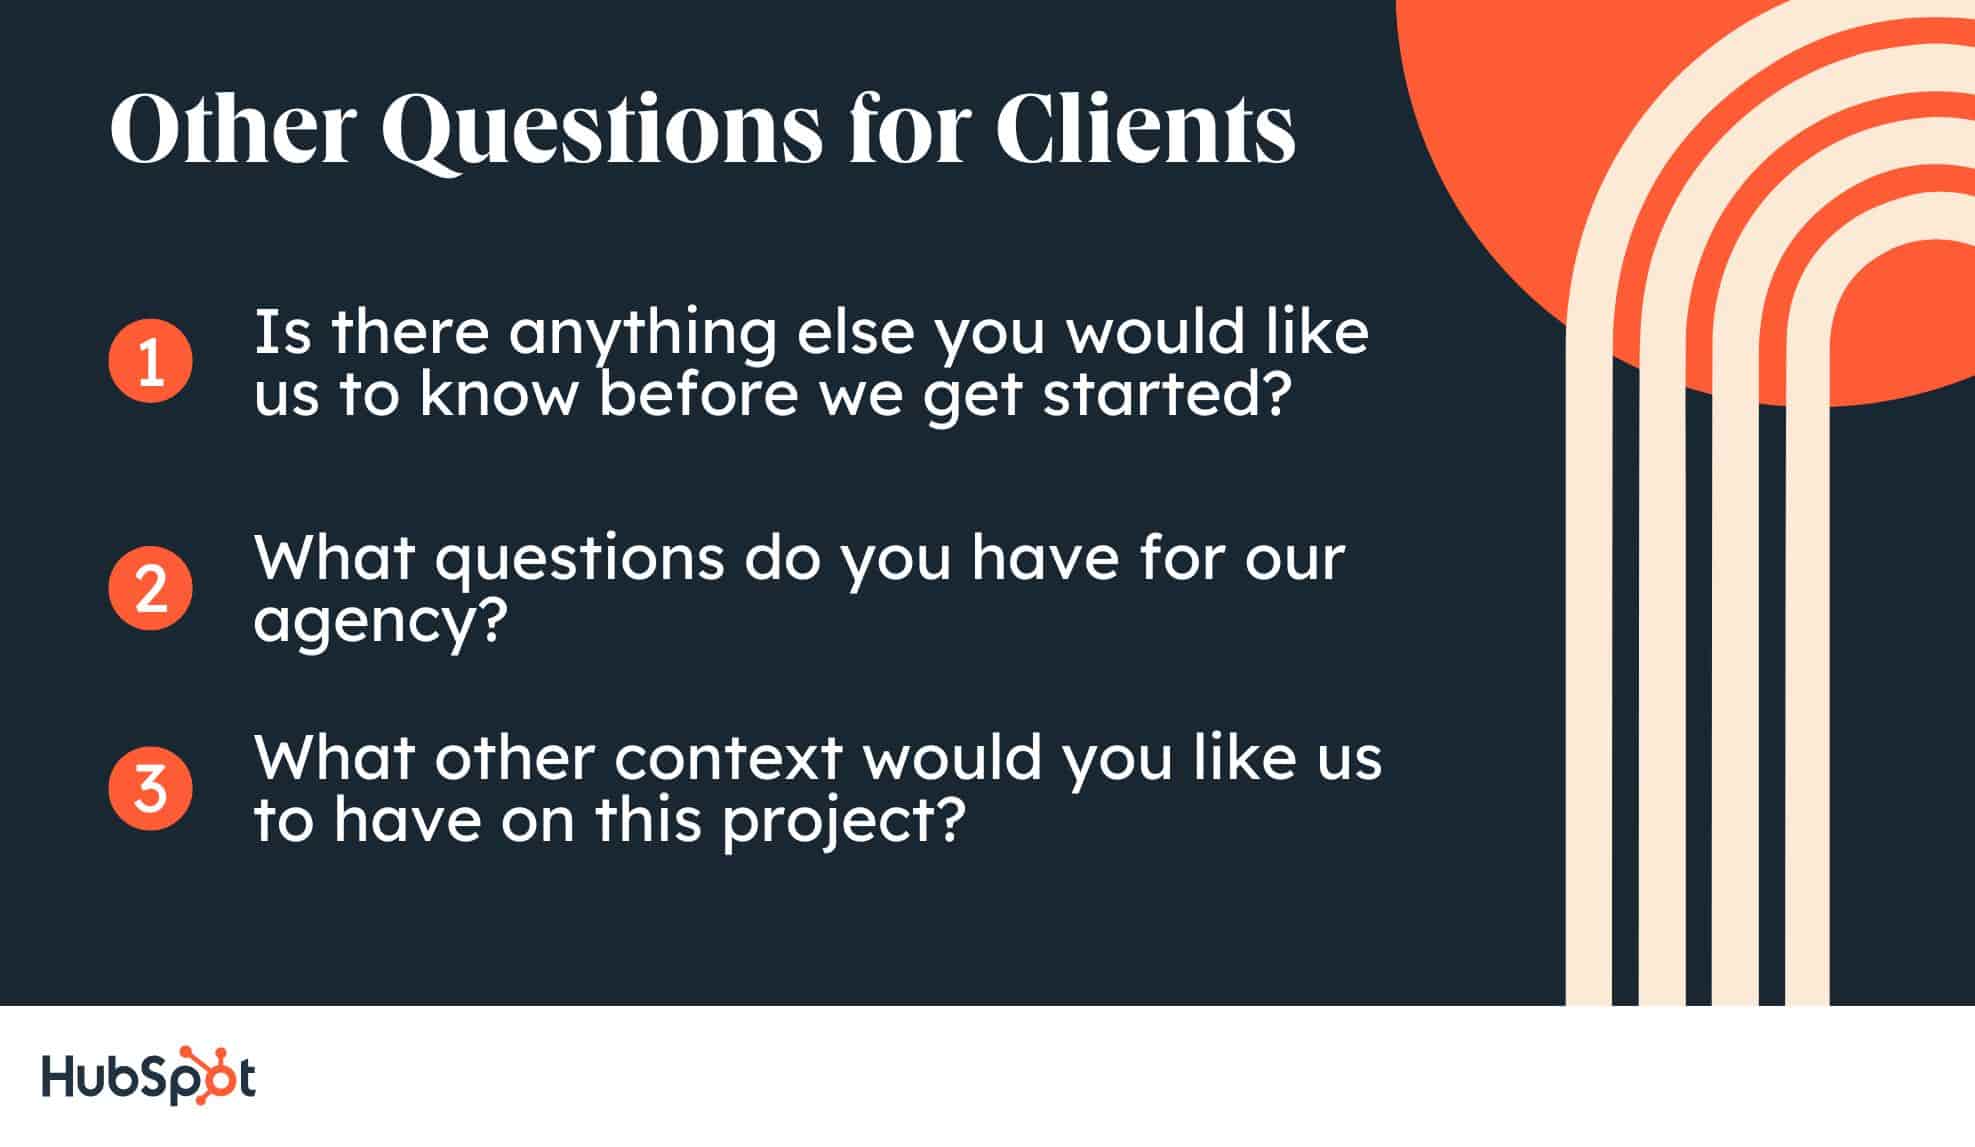 client intake form; Other Questions for Clients. Is there anything else you would like us to know before we get started? What questions do you have for our agency? What other context would you like us to have on this project?